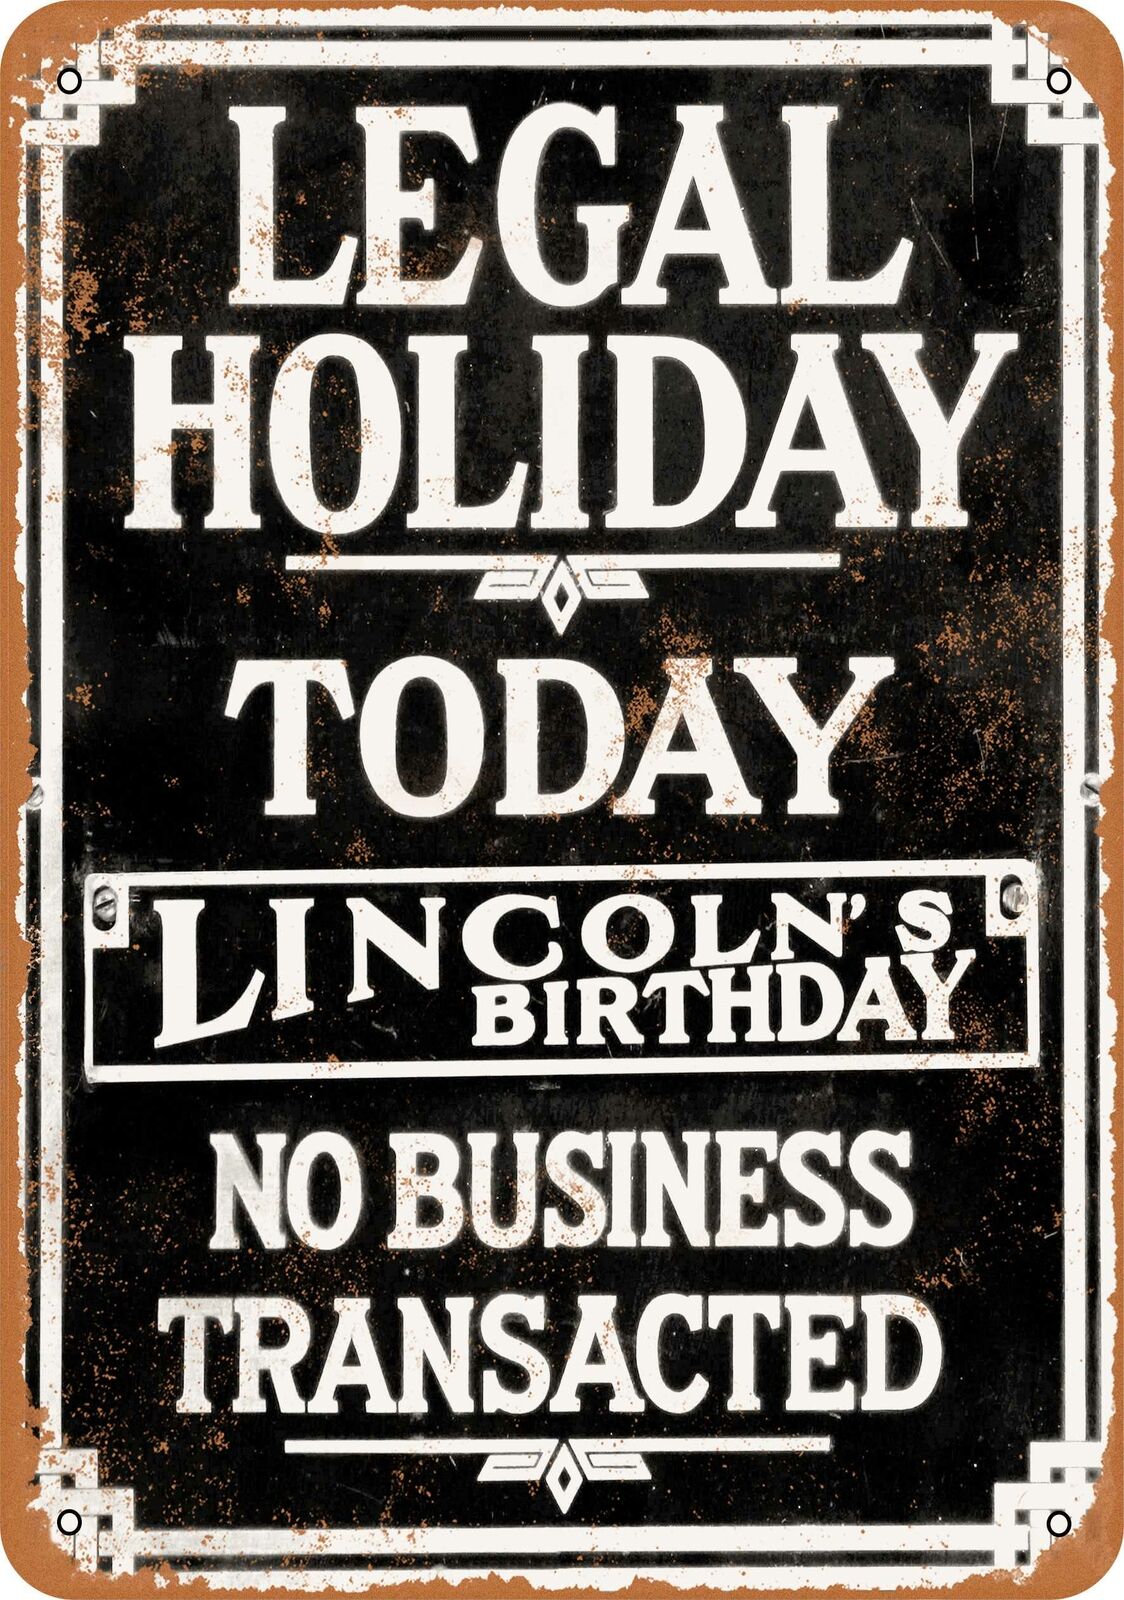 Metal Sign - 1920 Closed for Lincoln's Birthday - Vintage Look Reproduction